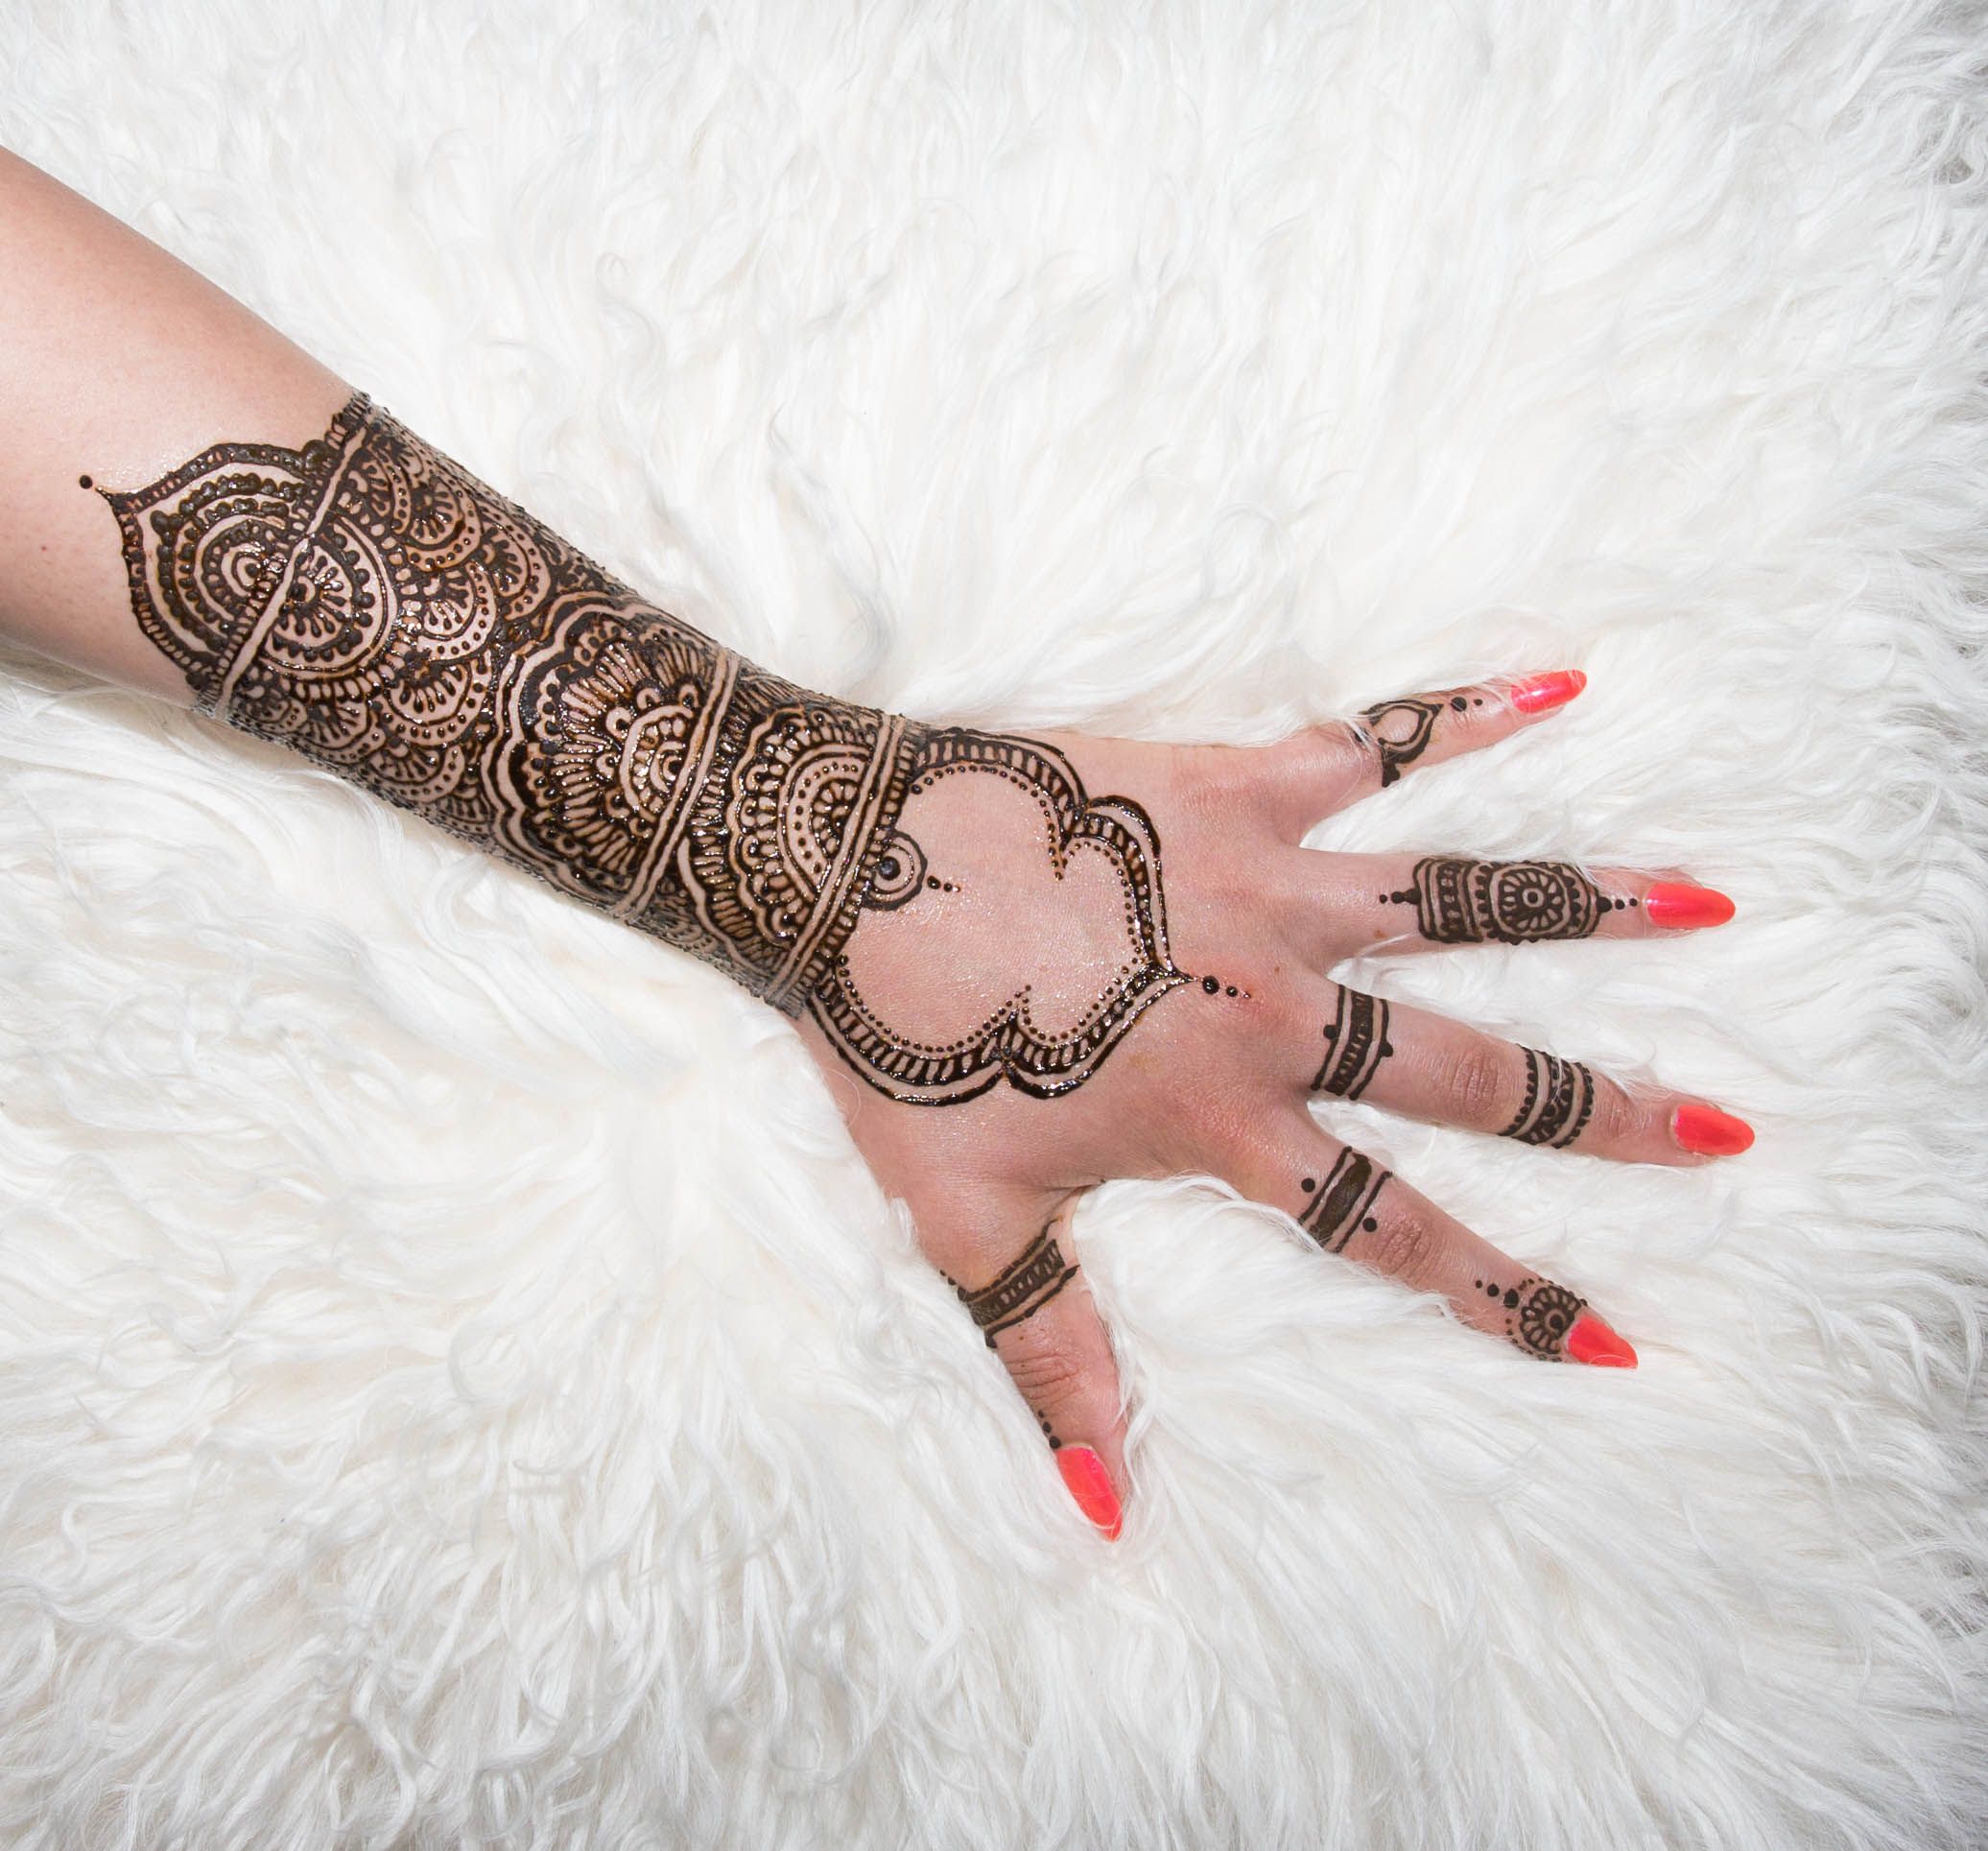 Henna Designs by Kavita Kharecha – How to Care for Your Henna